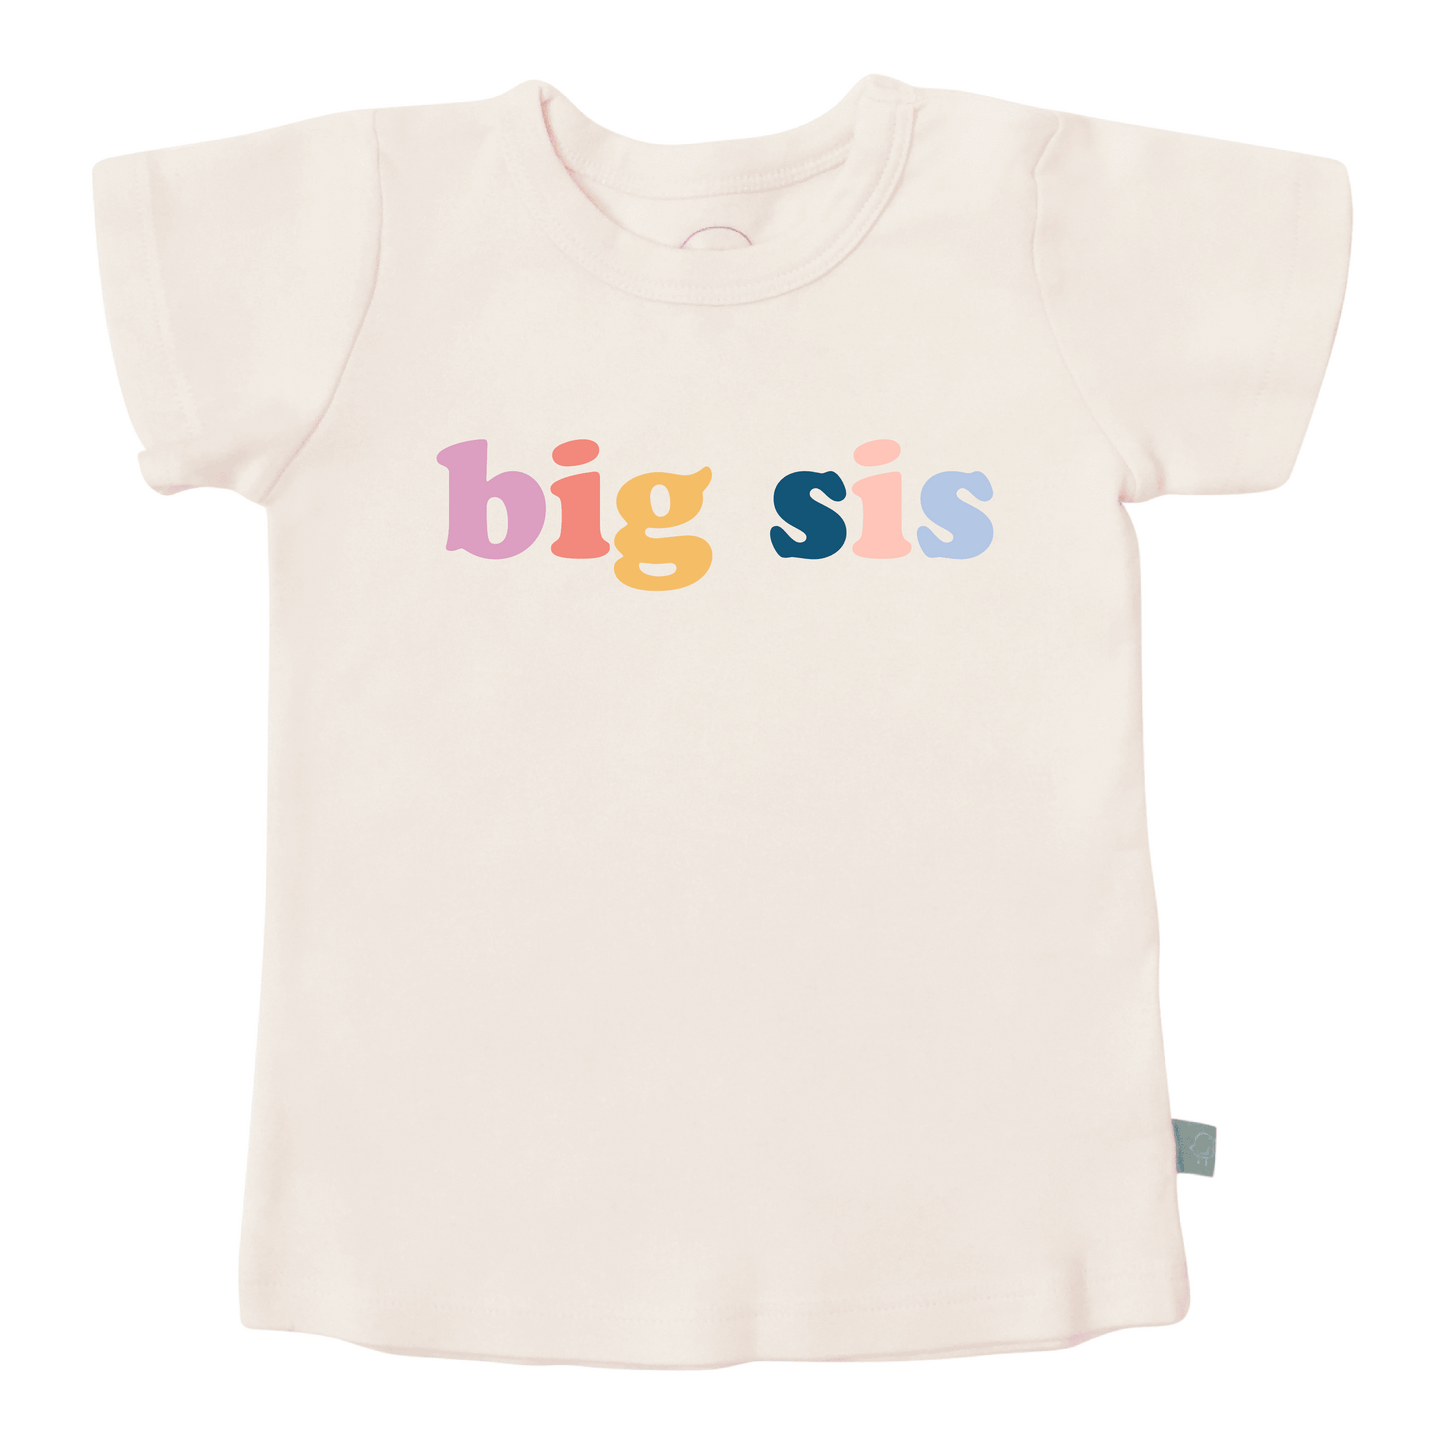 
Each growing kiddo is unique, and whether the one in your life is a superhero or unicorn rider, princess or rebel, our all-new graphic tees for toddlers have an ado